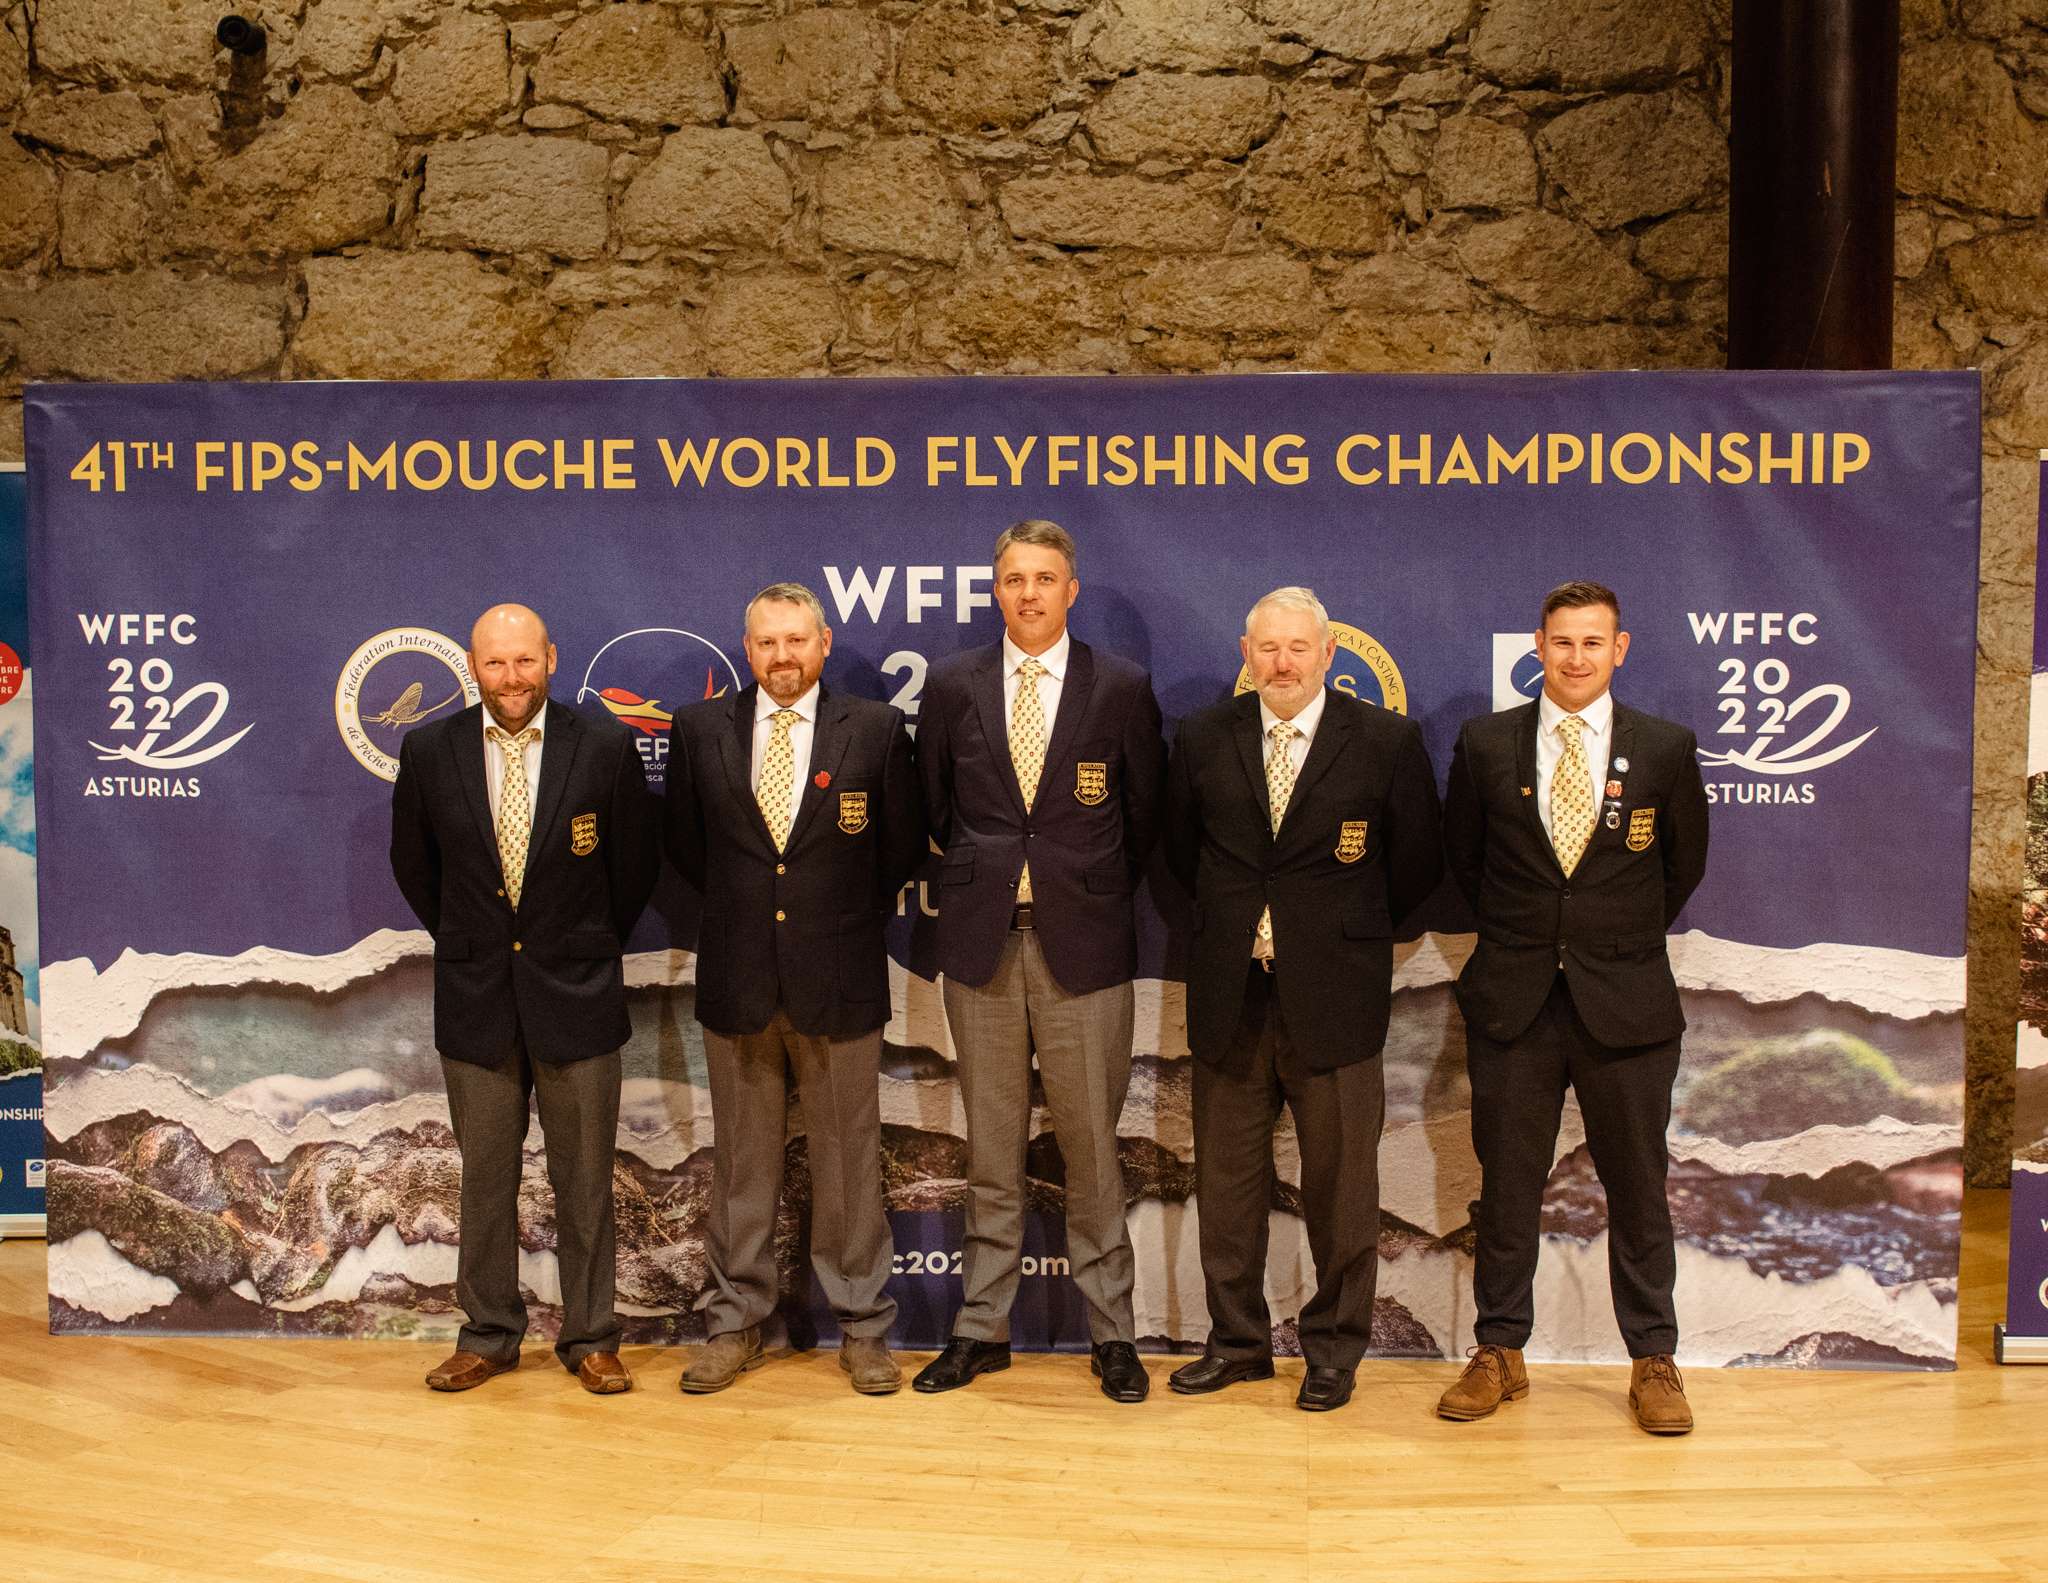 14 Facts About World Fly Fishing Championship 